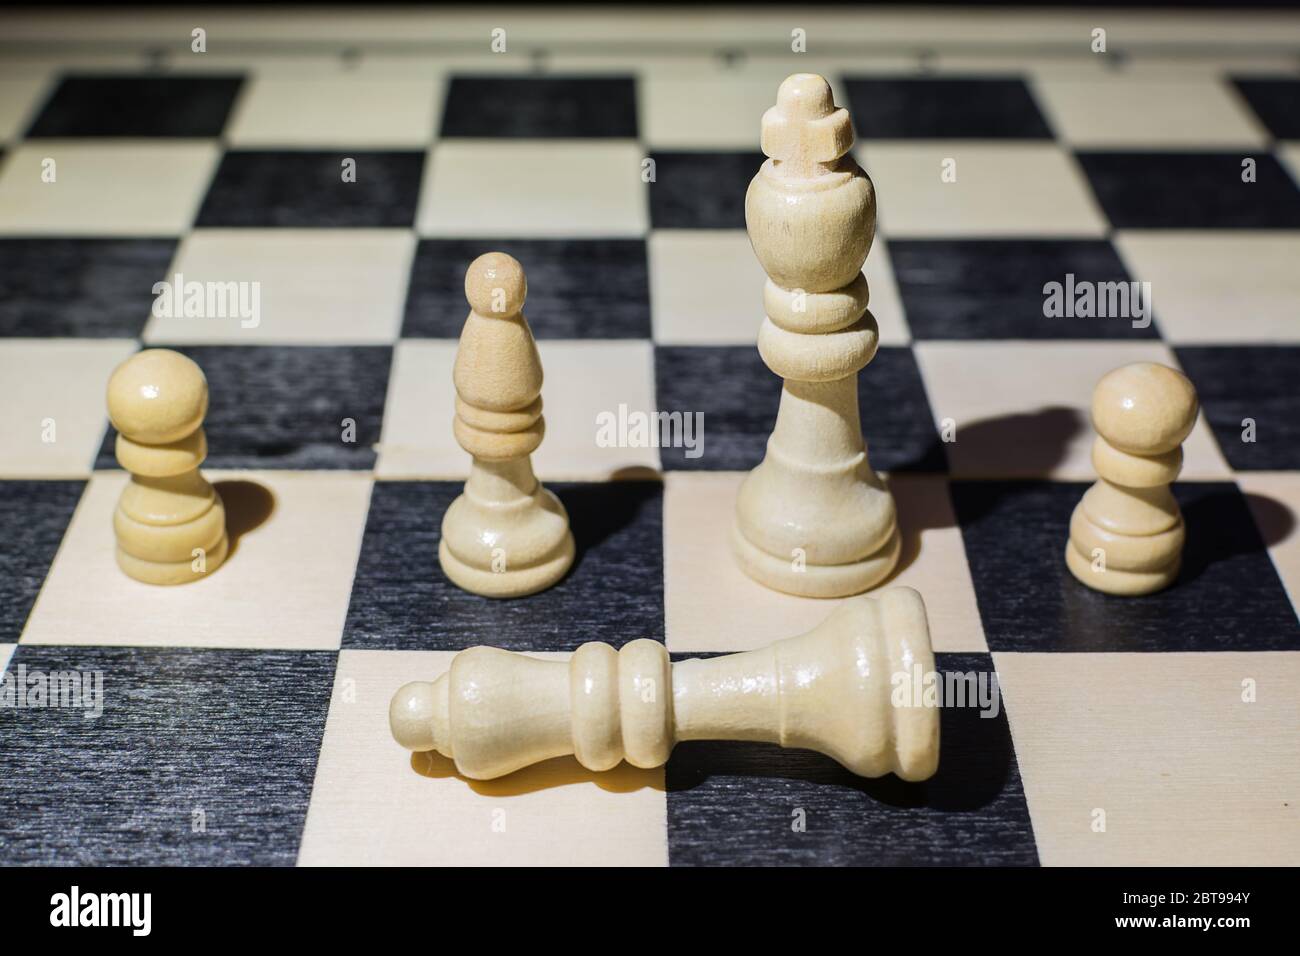 Woman Hand Holding a White Queen Piece Over a Chess Board